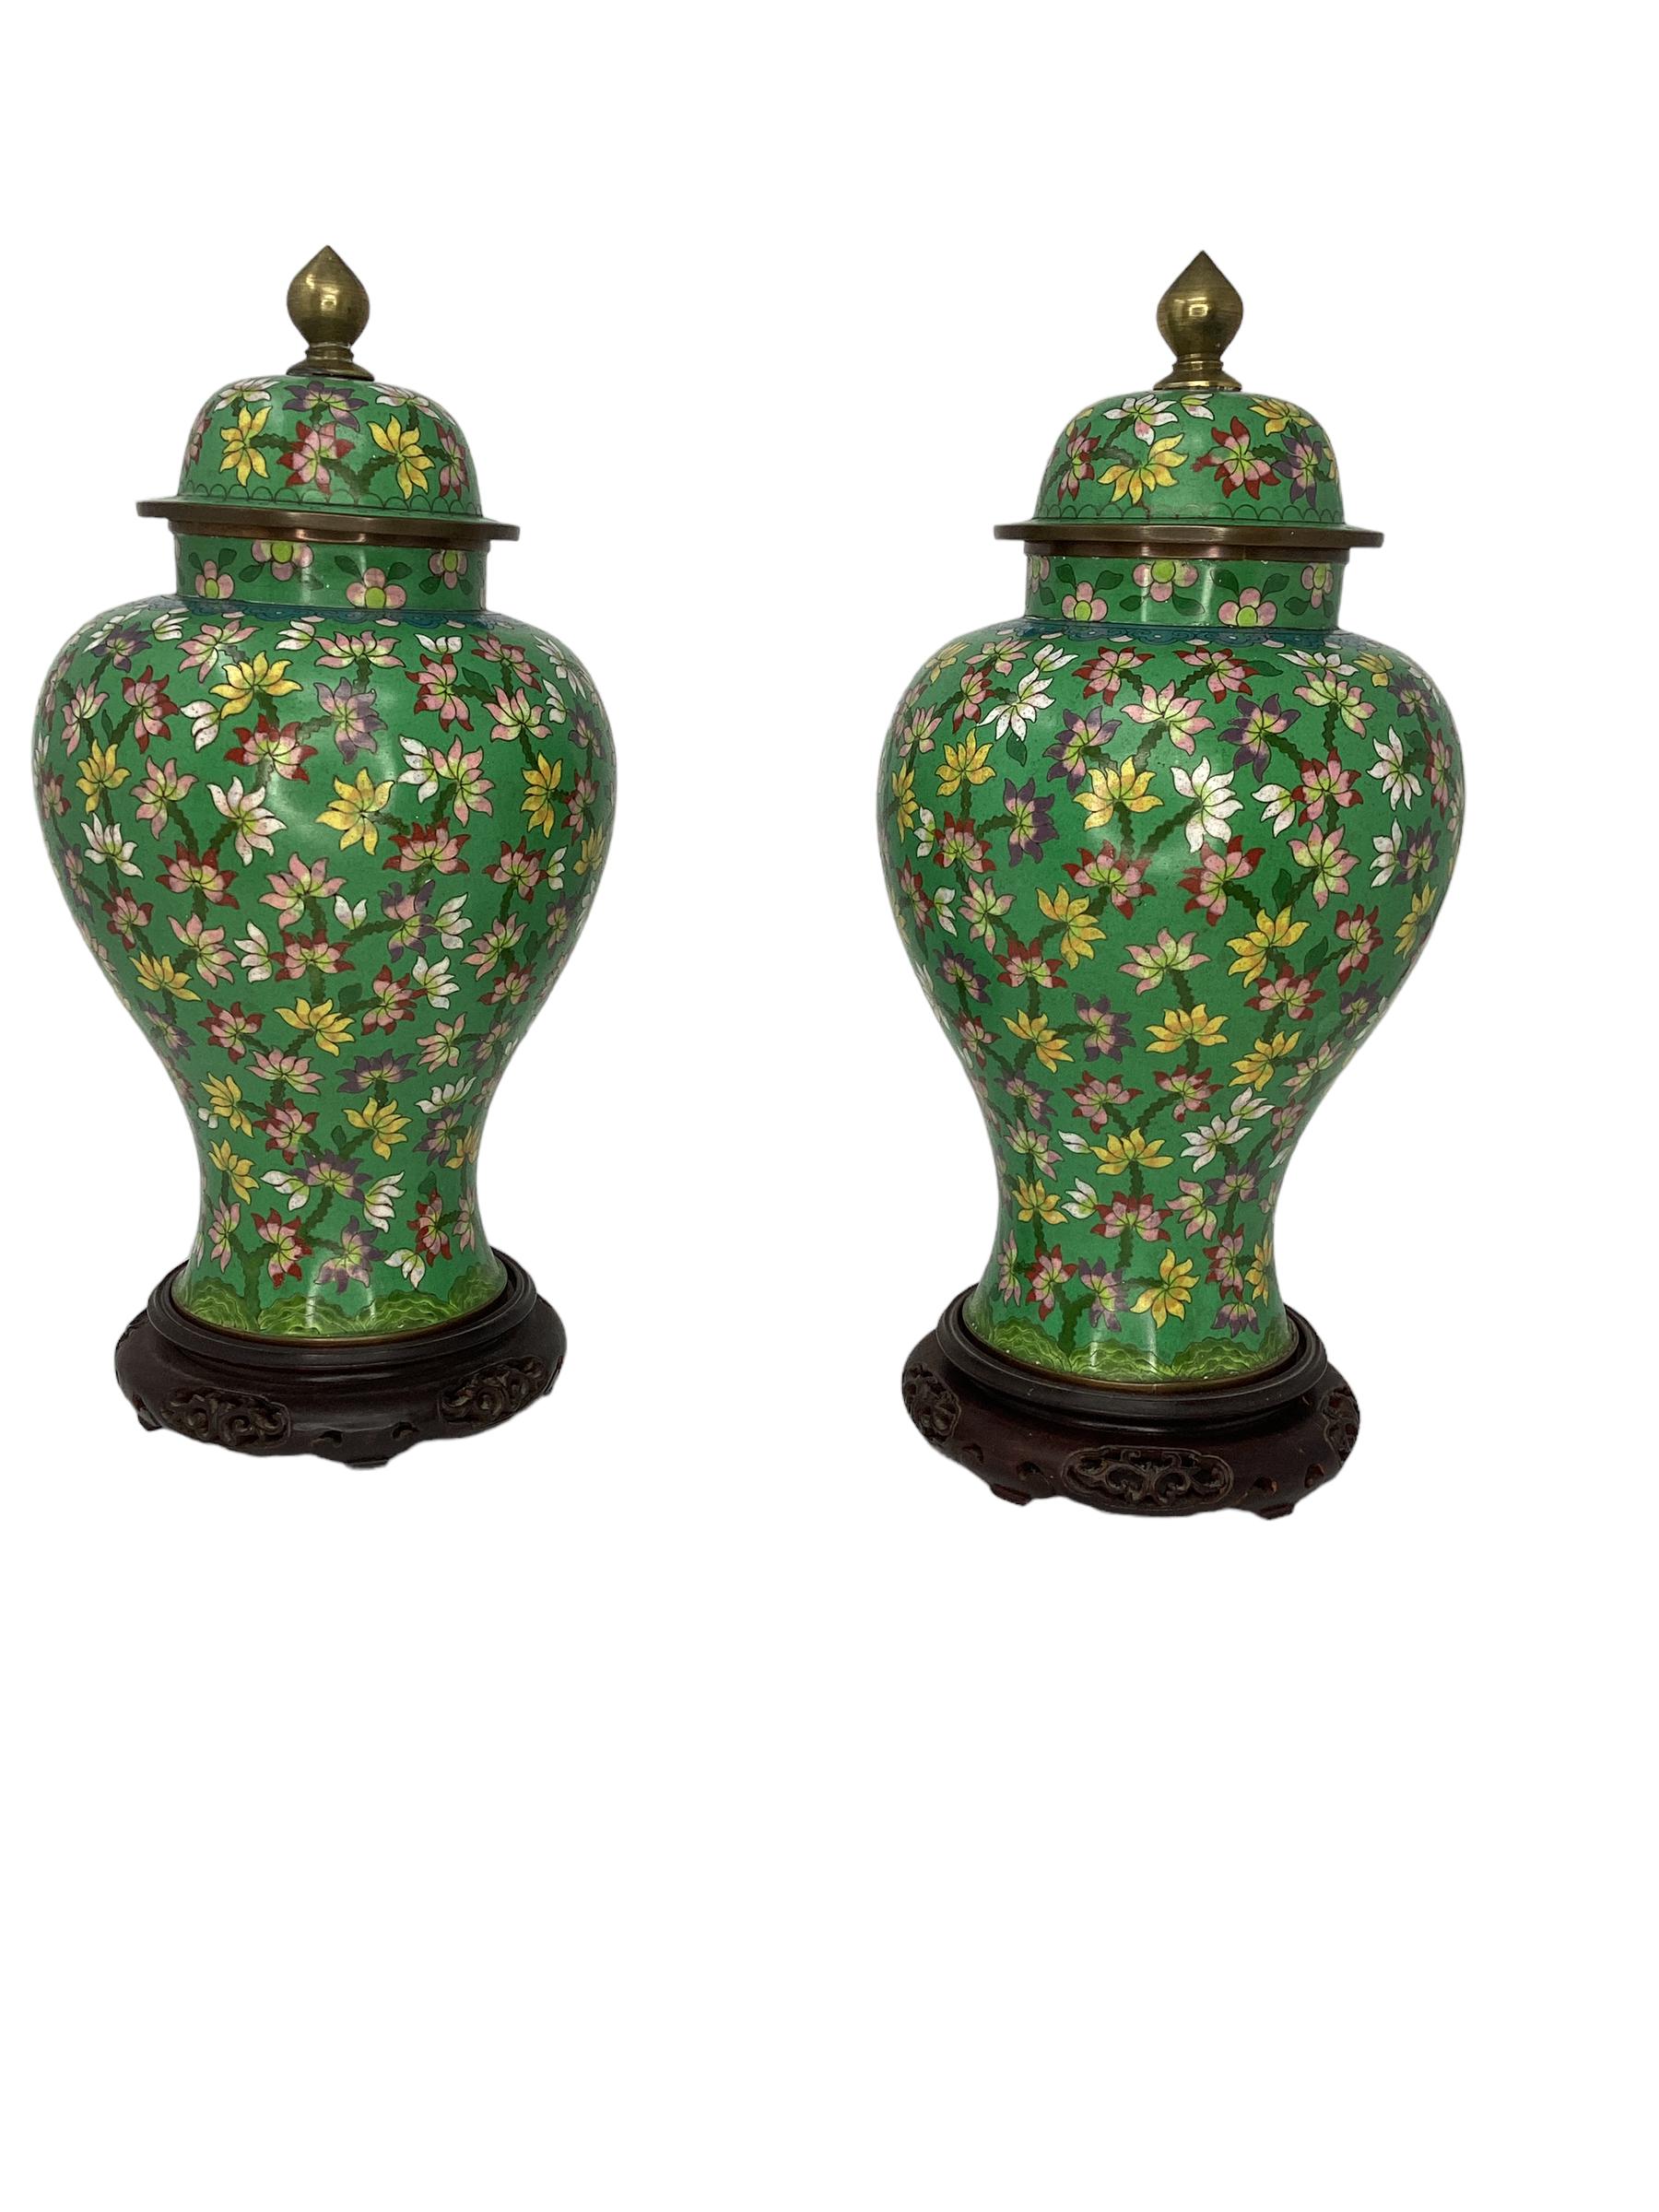 Pair of Antique Chinese Cloisonné Covered Ginger Jar Vases 8